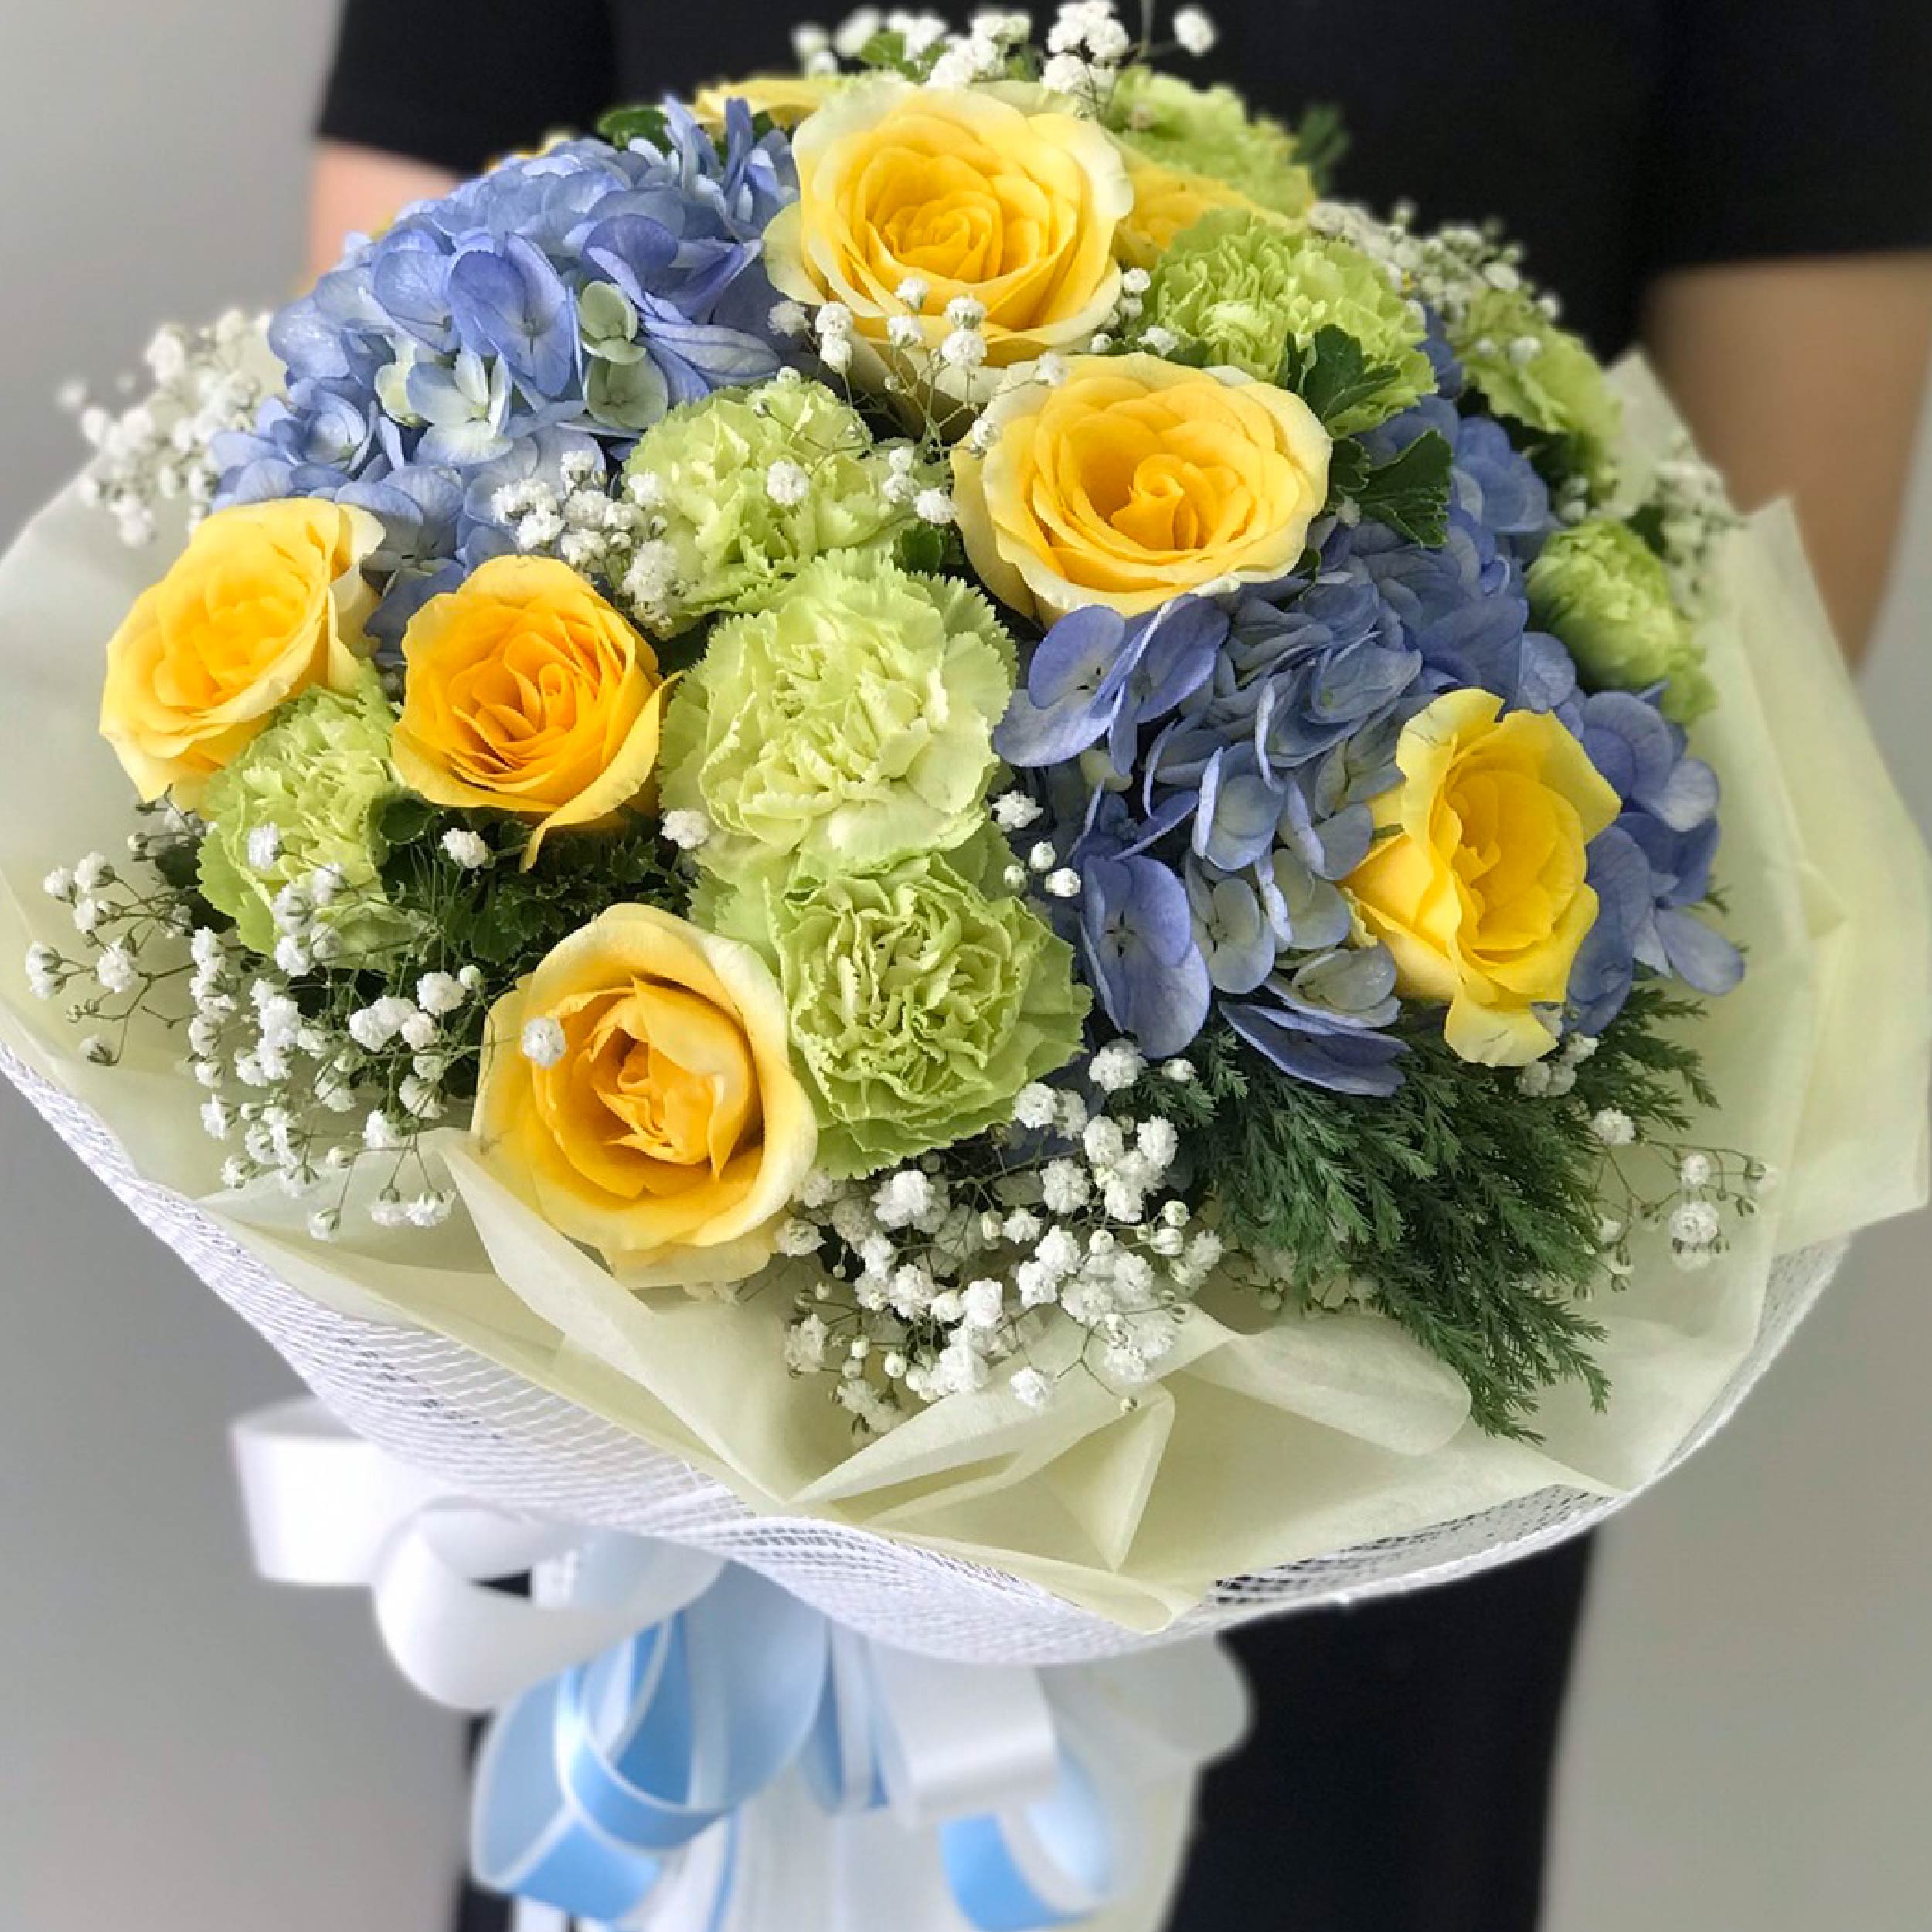 Lovely Bouquet Of Hydrangea, Rose, Lisianthus and Gypso